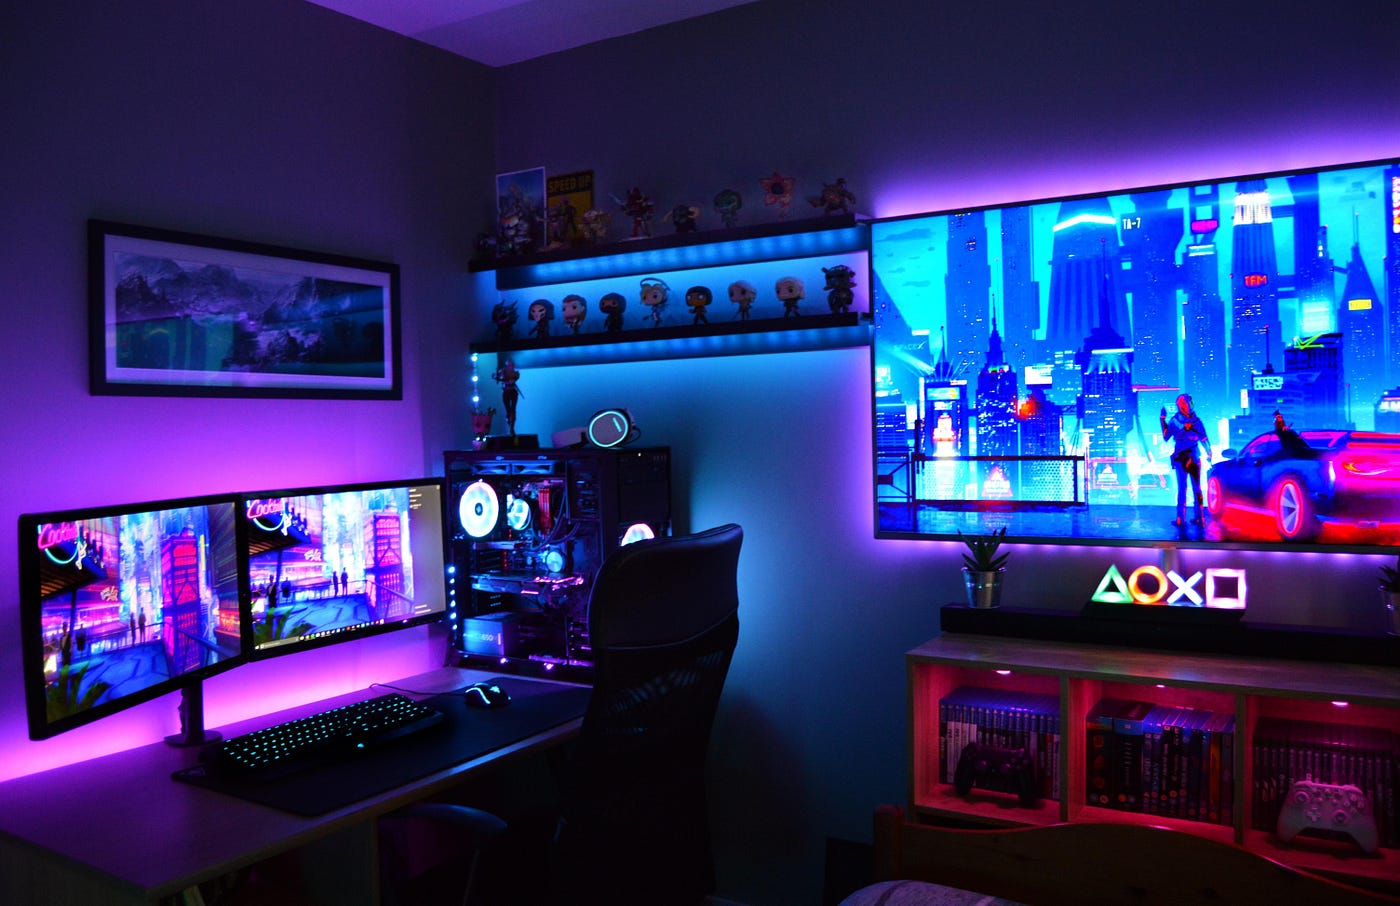 7 Tips To Improve The Aesthetics Of Your Gaming Setup | by Arlo Rath |  Medium